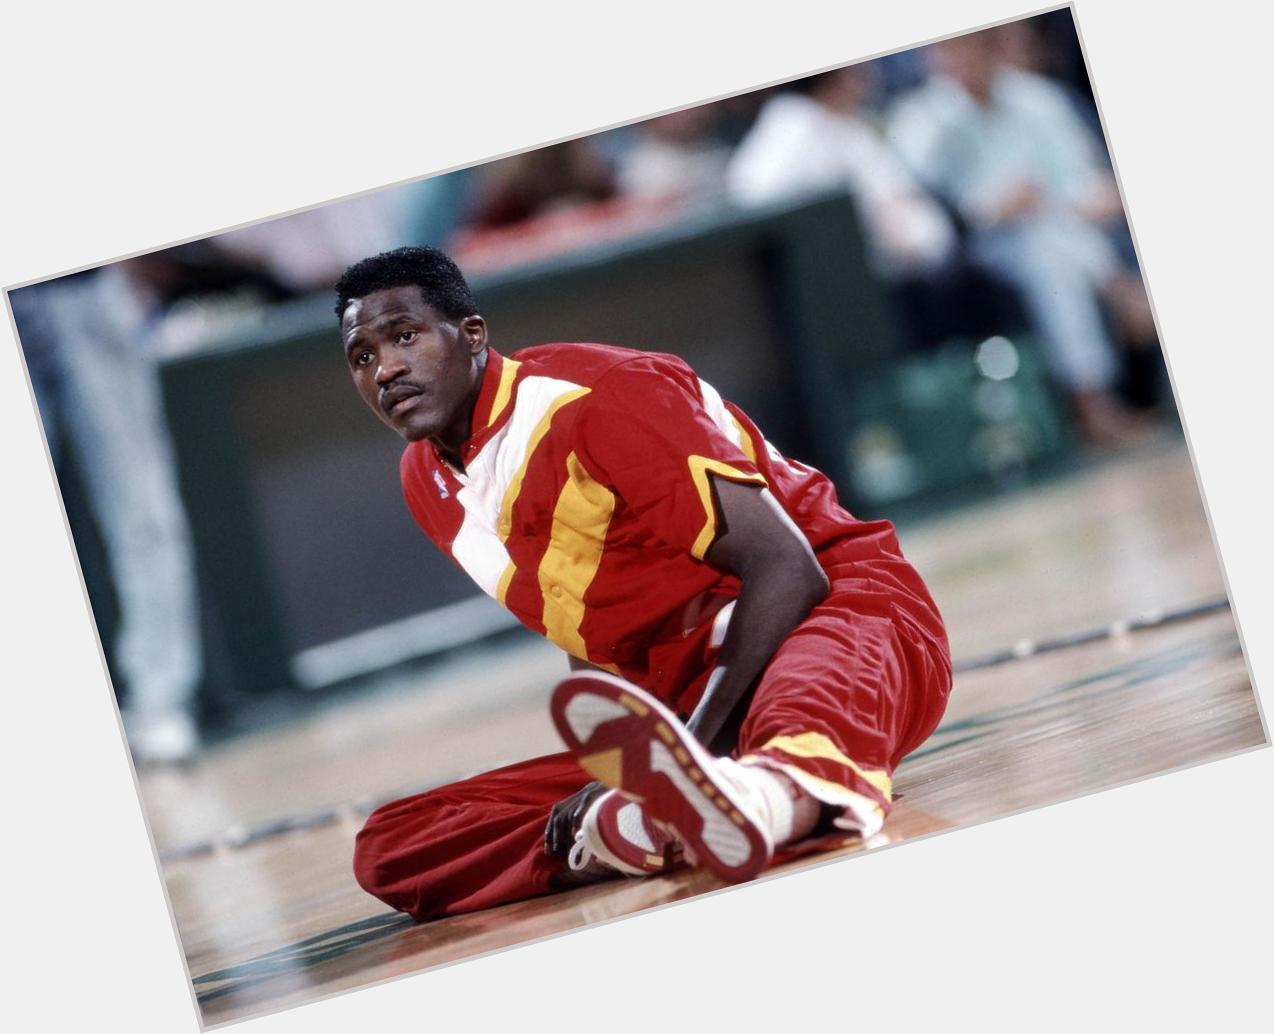 One of my fav players \" Happy Birthday Legend Dominique Wilkins! 